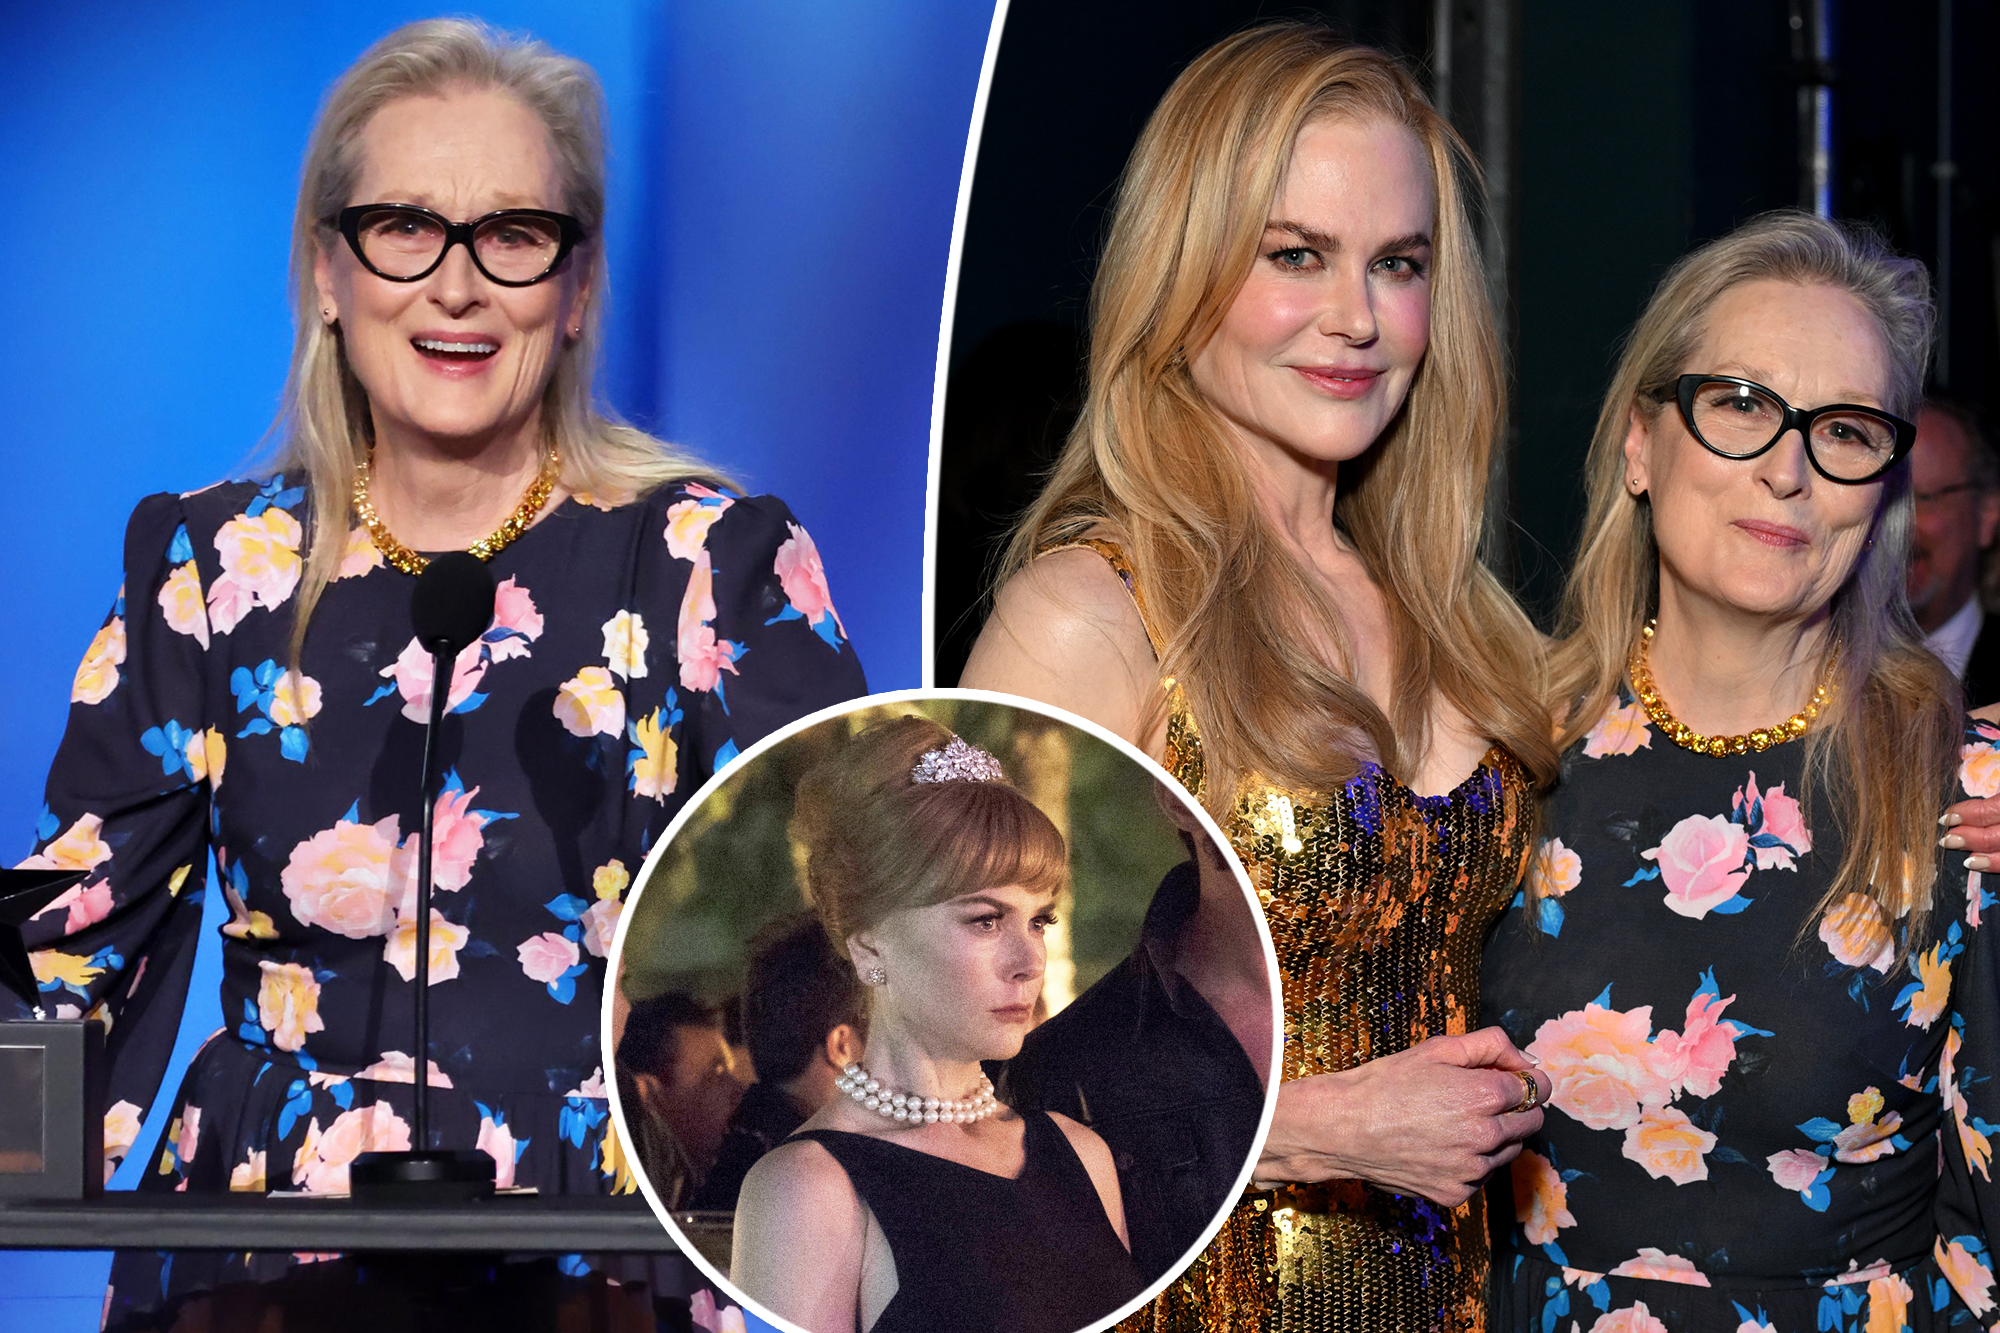 Meryl Streep split with Nicole Kidman with an inset of her character from Big Little Lies."